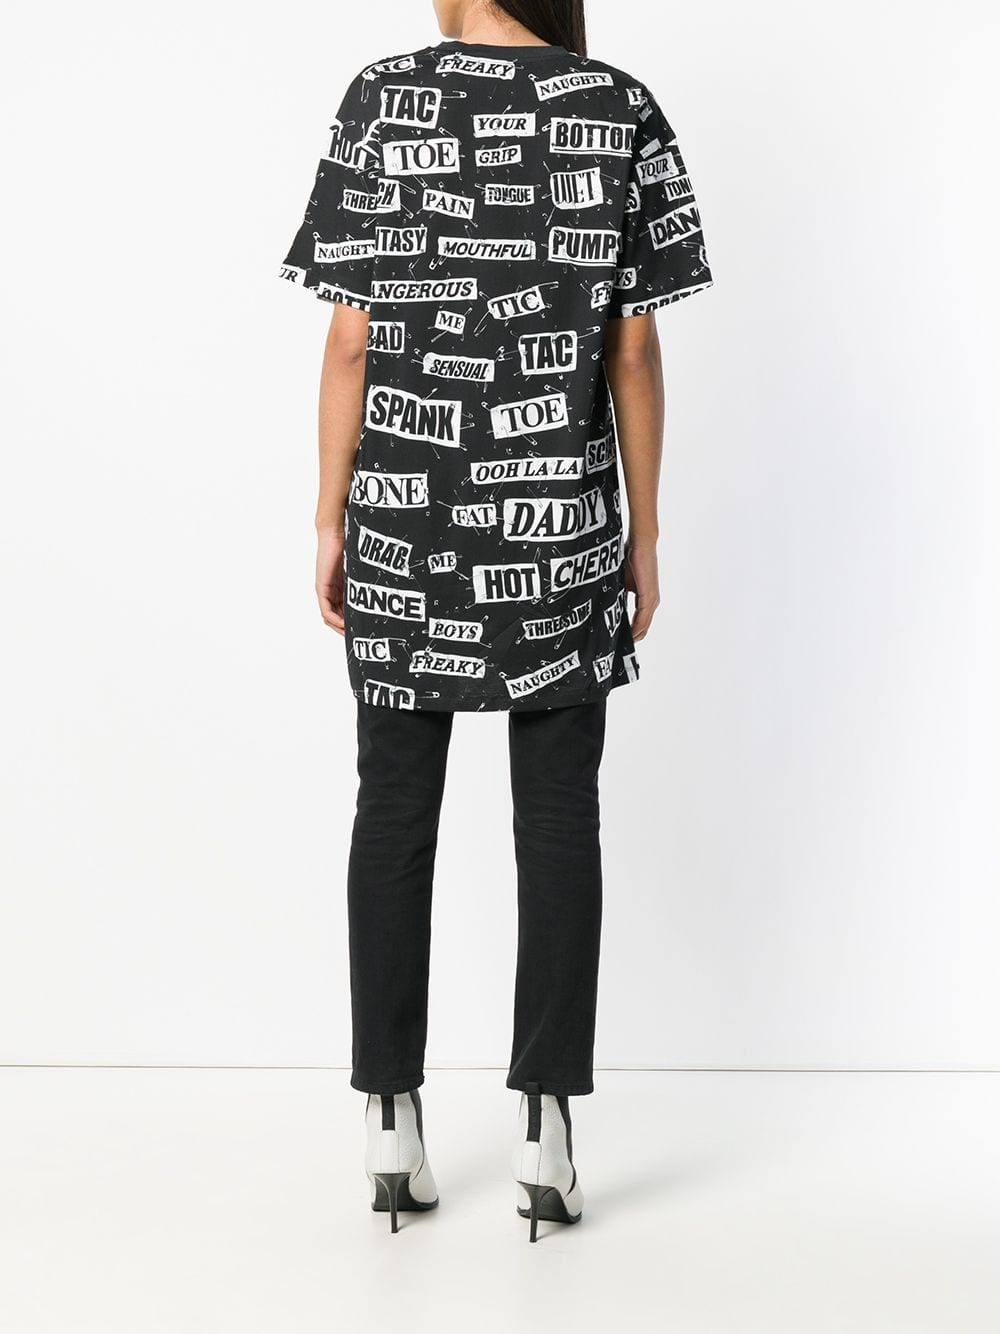 moschino LABEL PRINT DRESS available on montiboutique.com - 24017